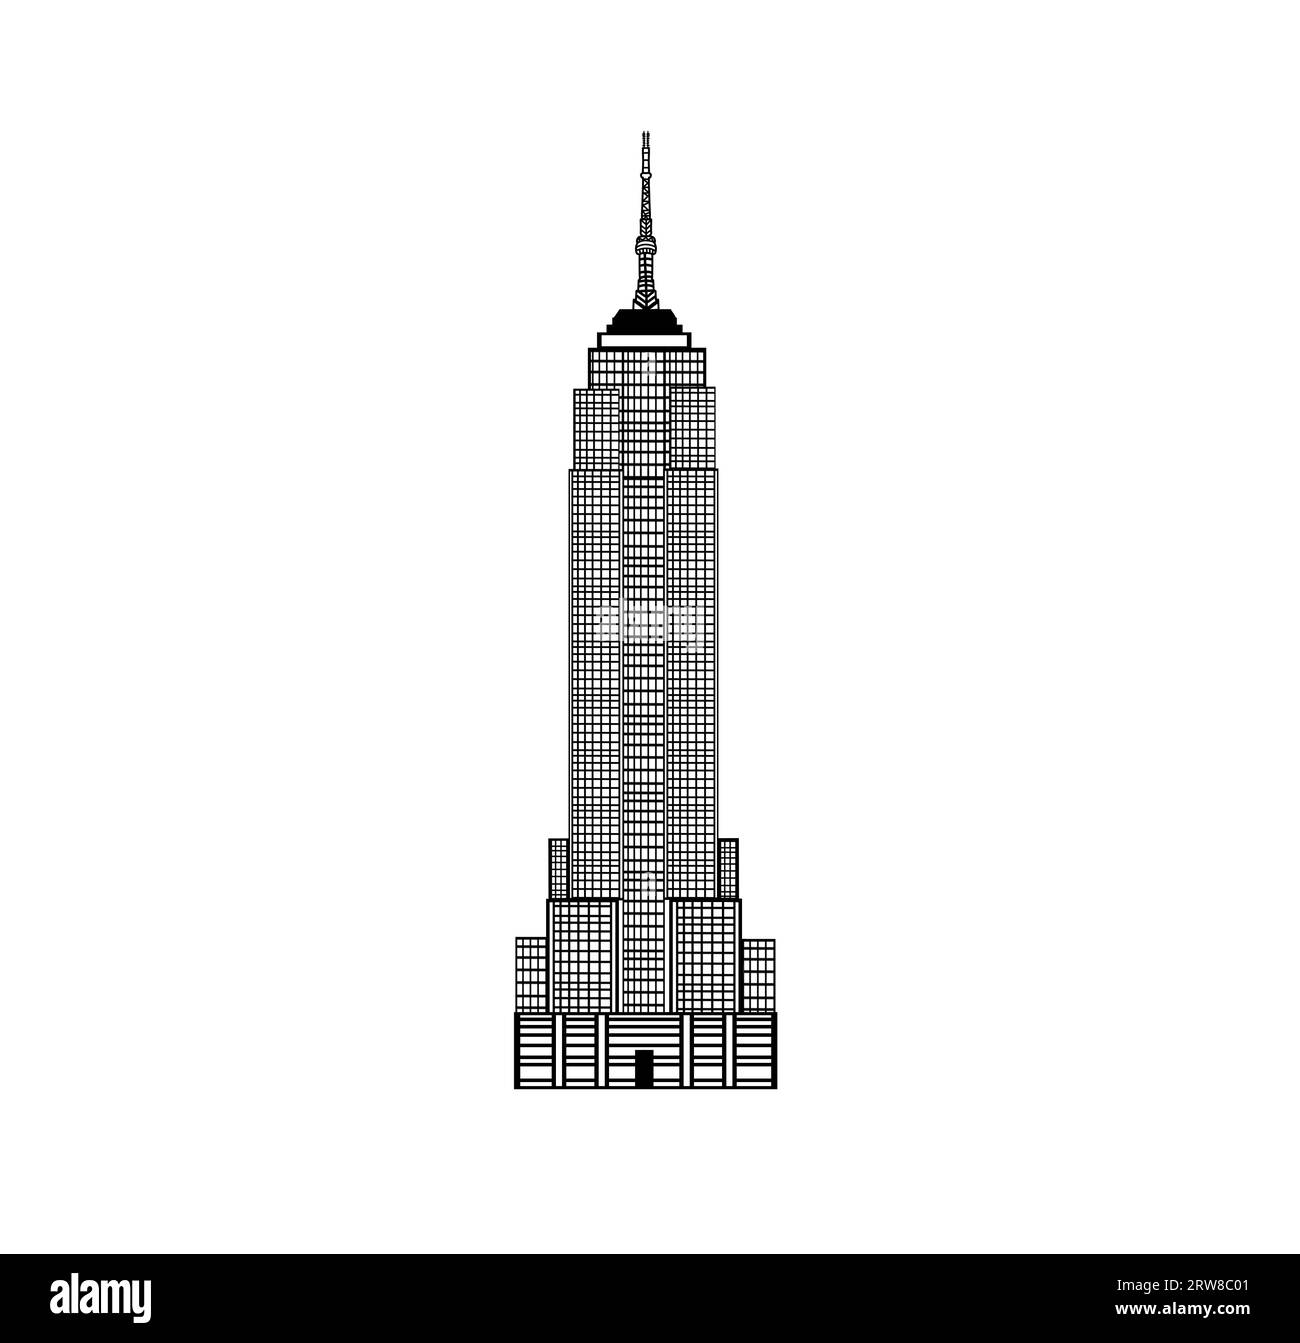 empire state building vector Stock Photo